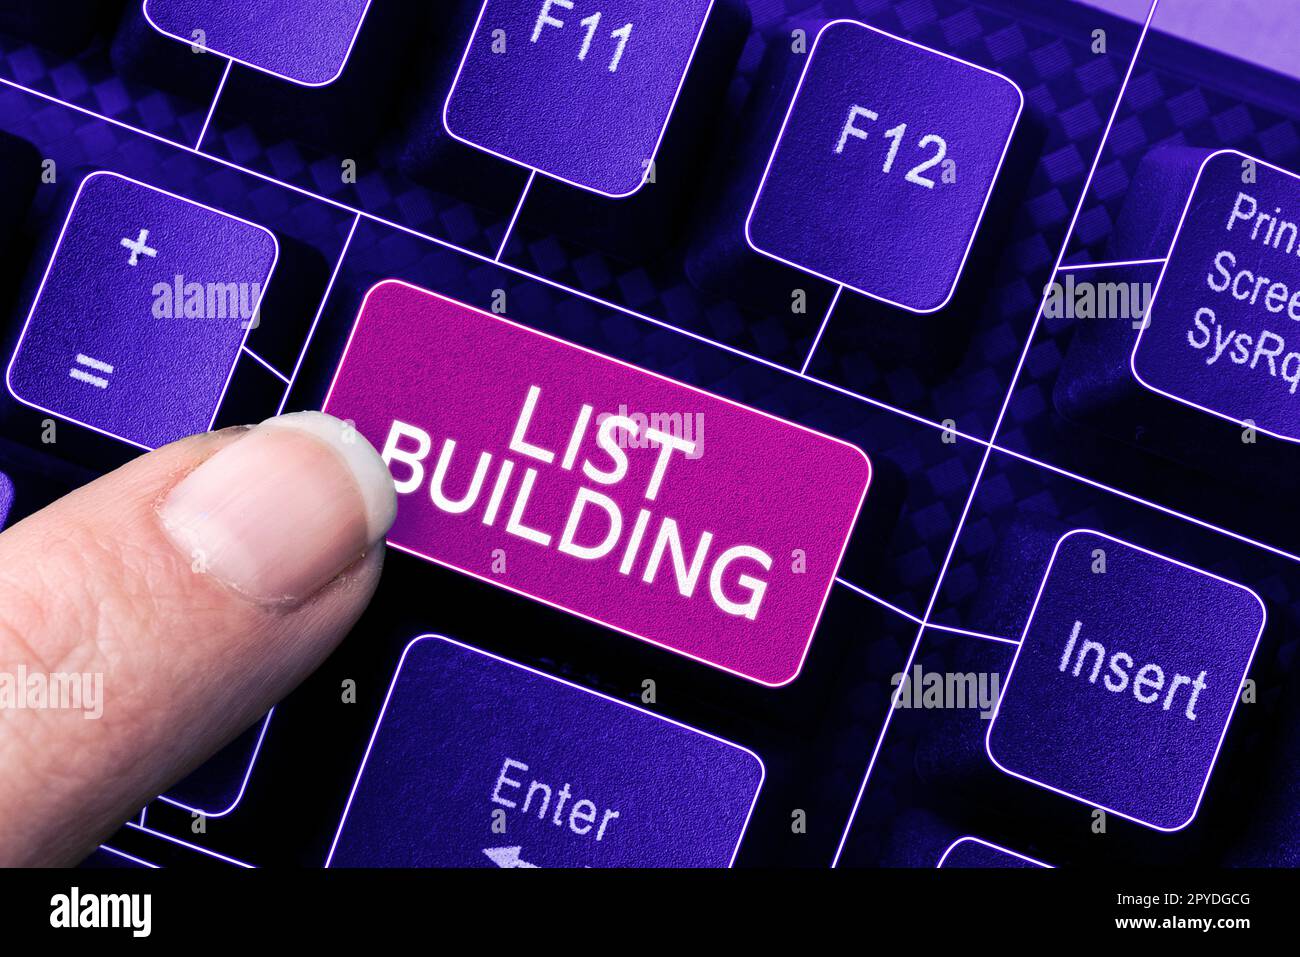 Sign displaying List Building. Concept meaning database of people you can contact with your marketing message Stock Photo